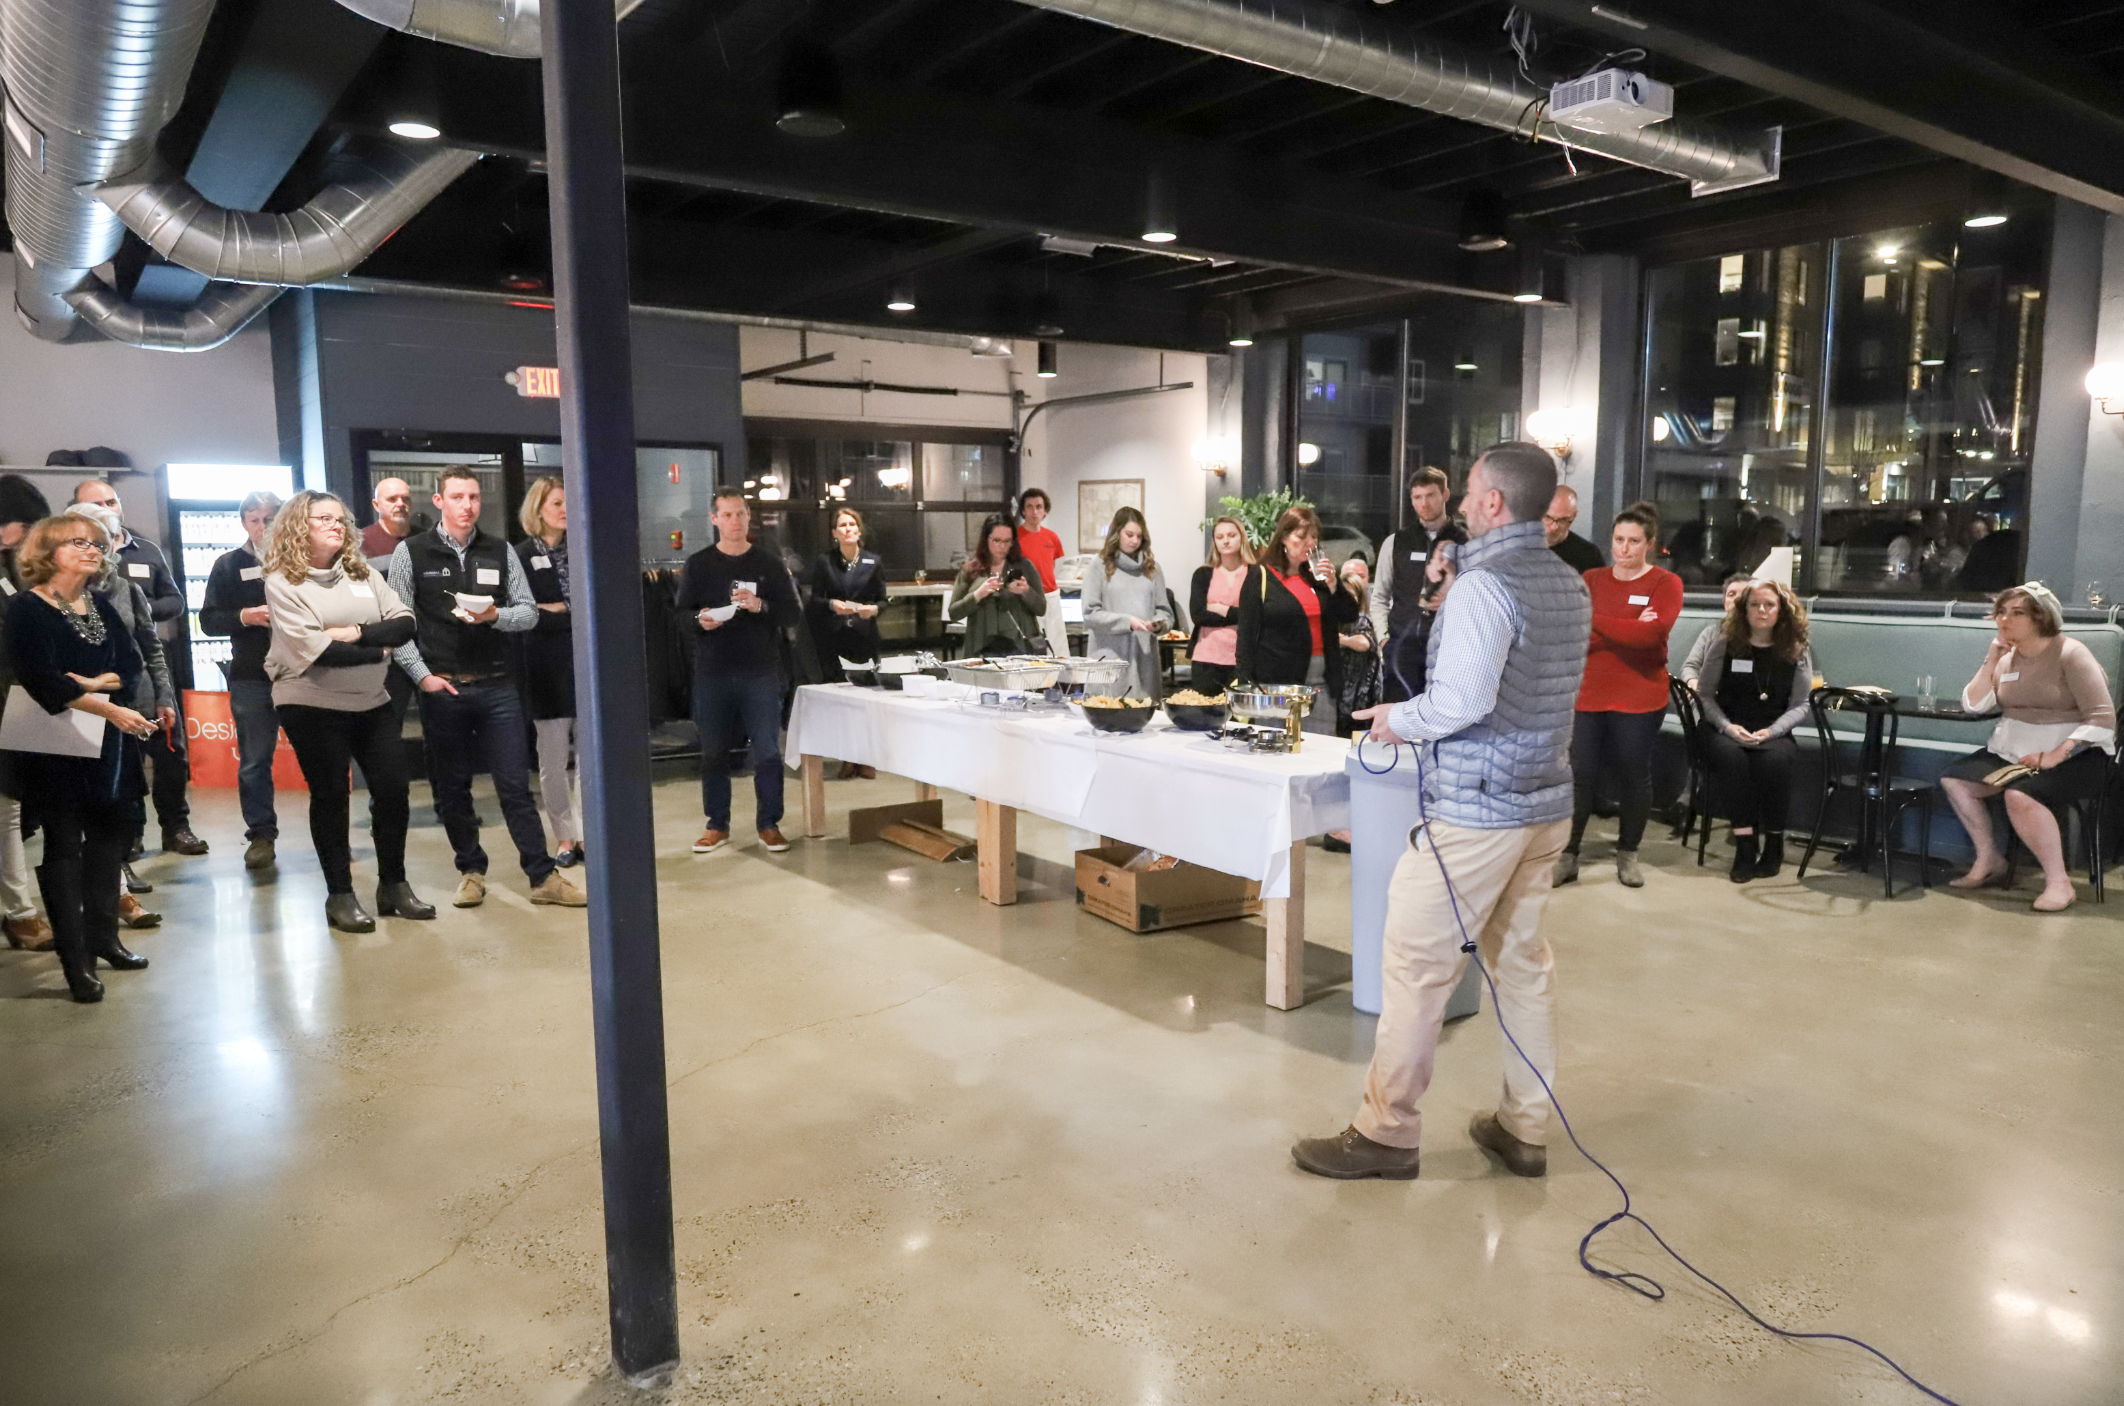 Jason speaking to the crowd at a recent event for builders, architects, and designers. 